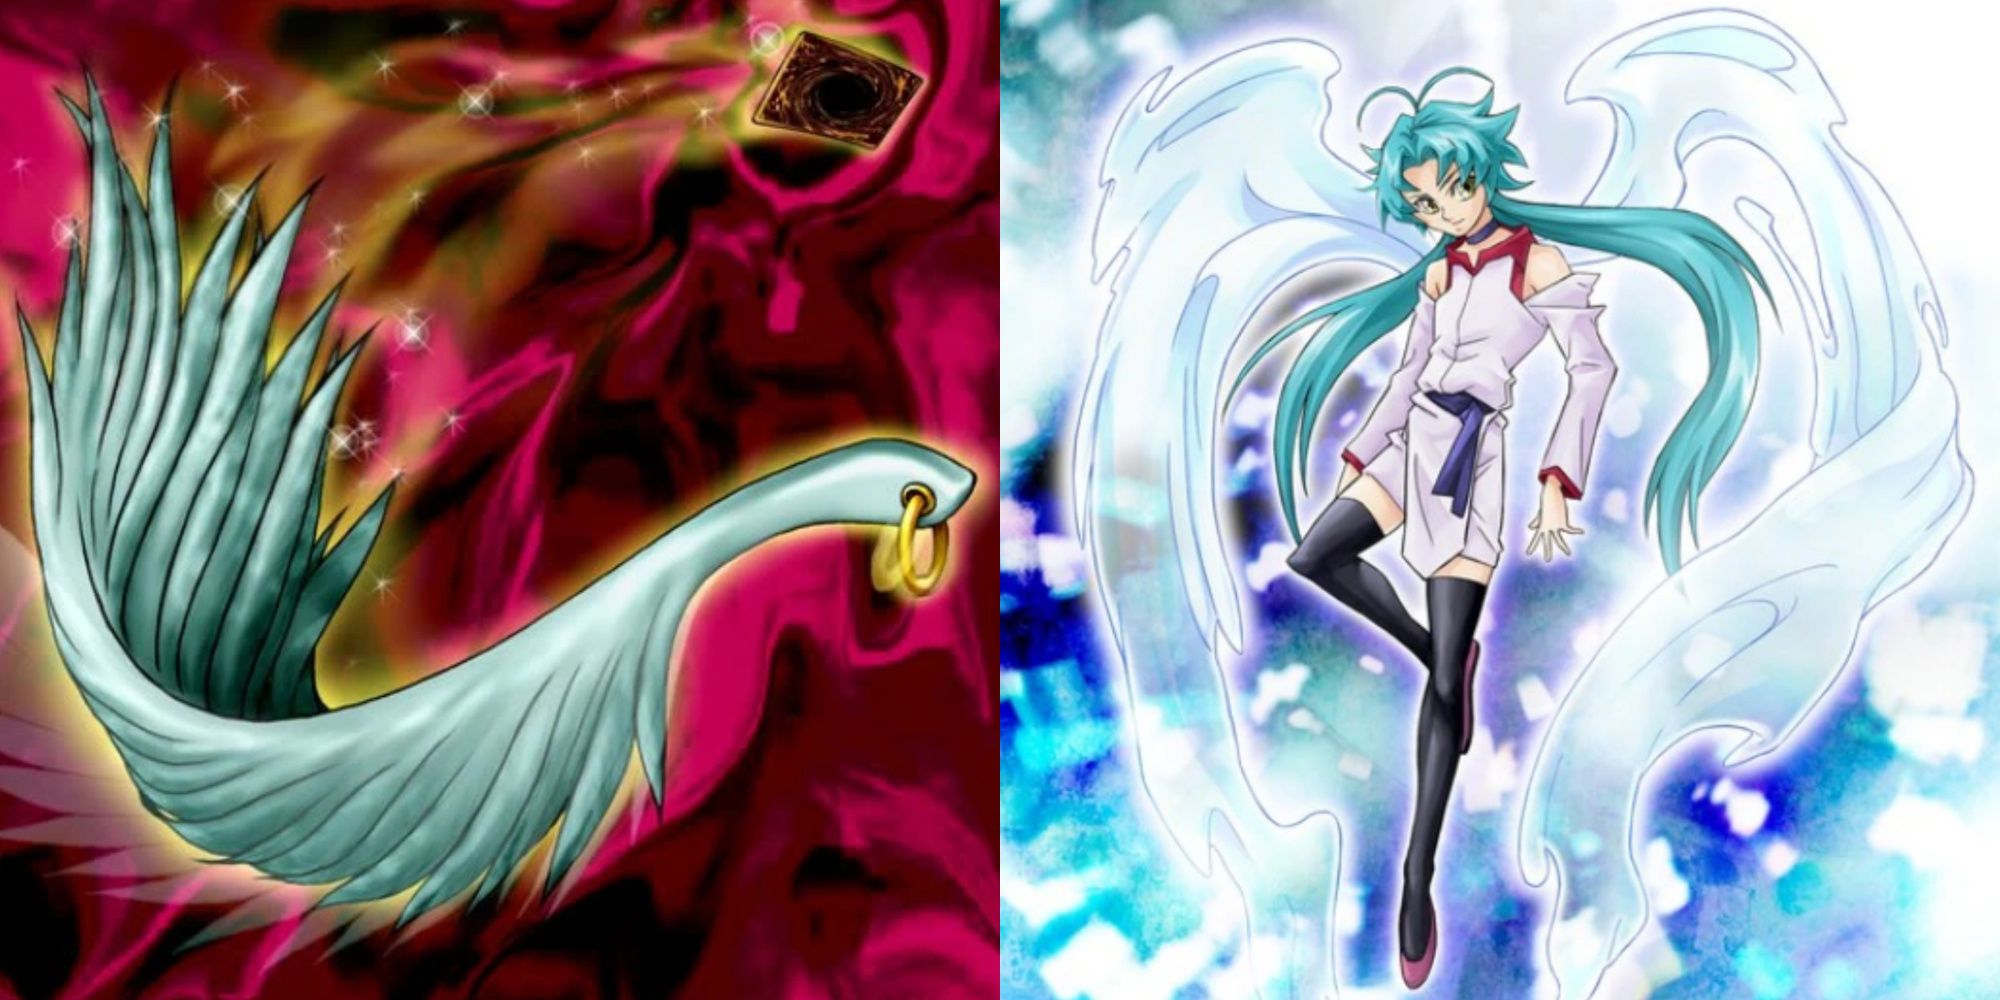 yugioh oldest metagame cards featured image with harpies feather duster and effect veiler card art